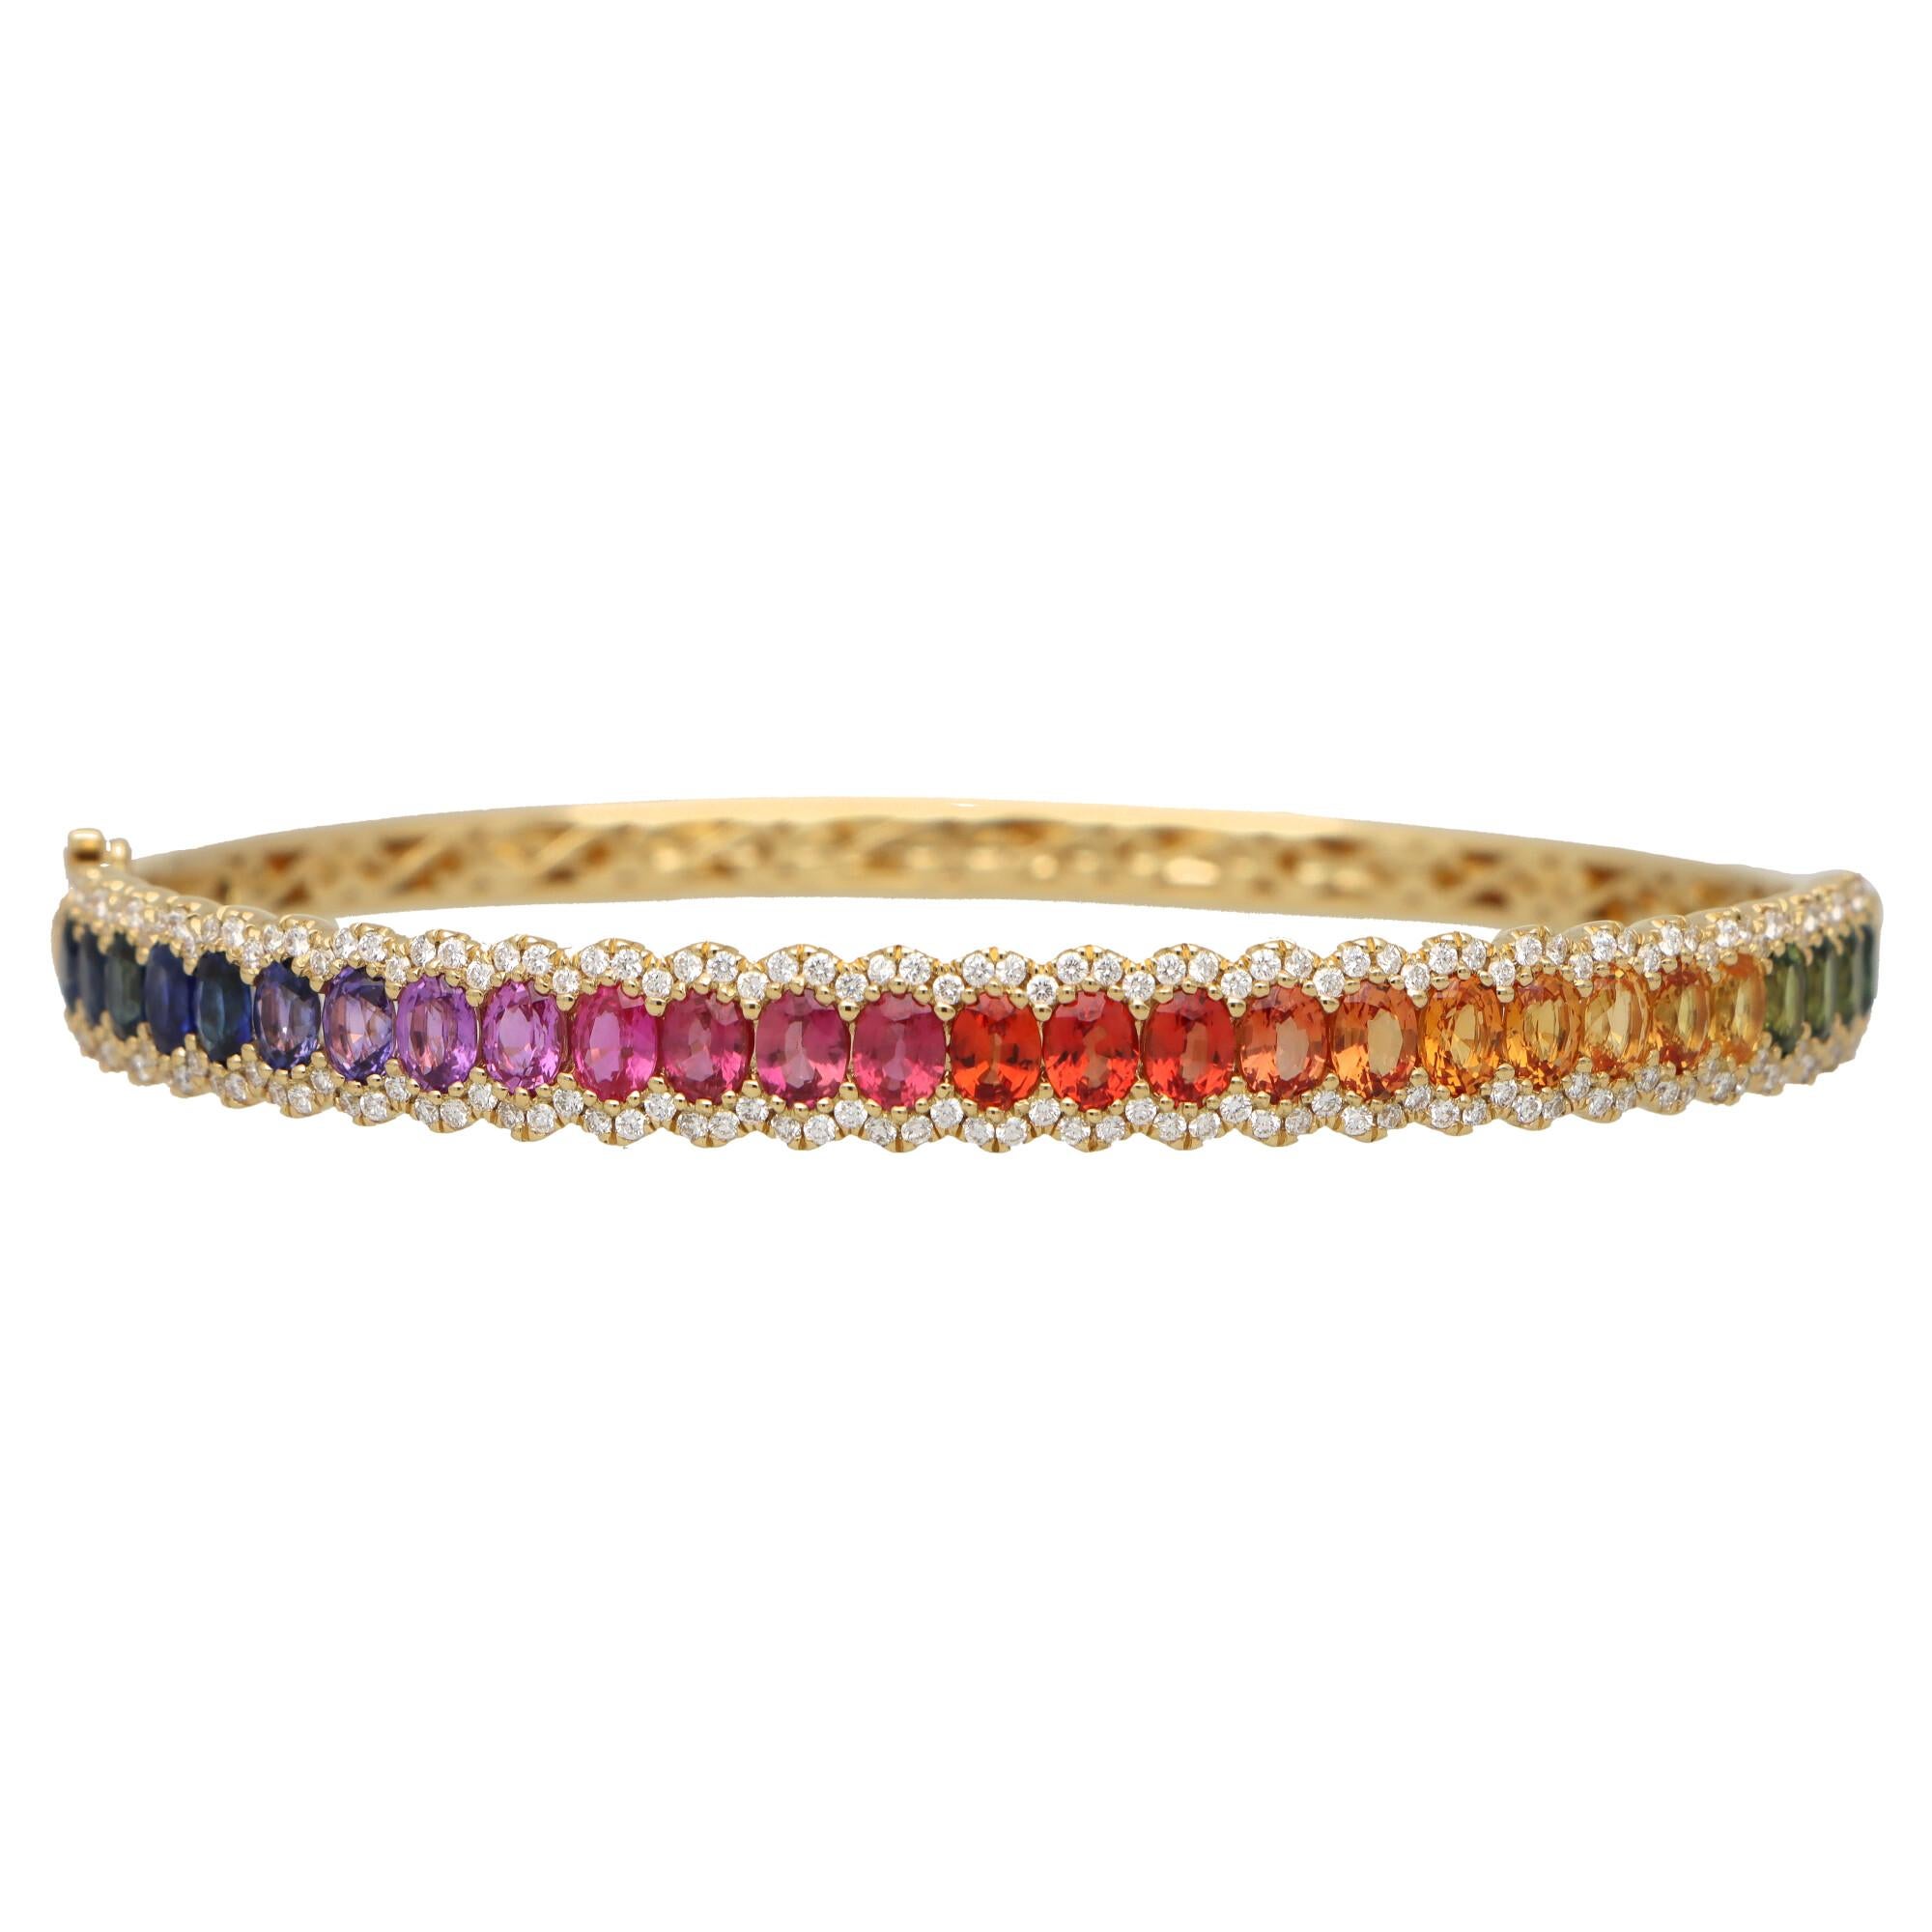 Women's or Men's Contemporary Rainbow Sapphire and Diamond Hinged Bangle Set in 18k Yellow Gold